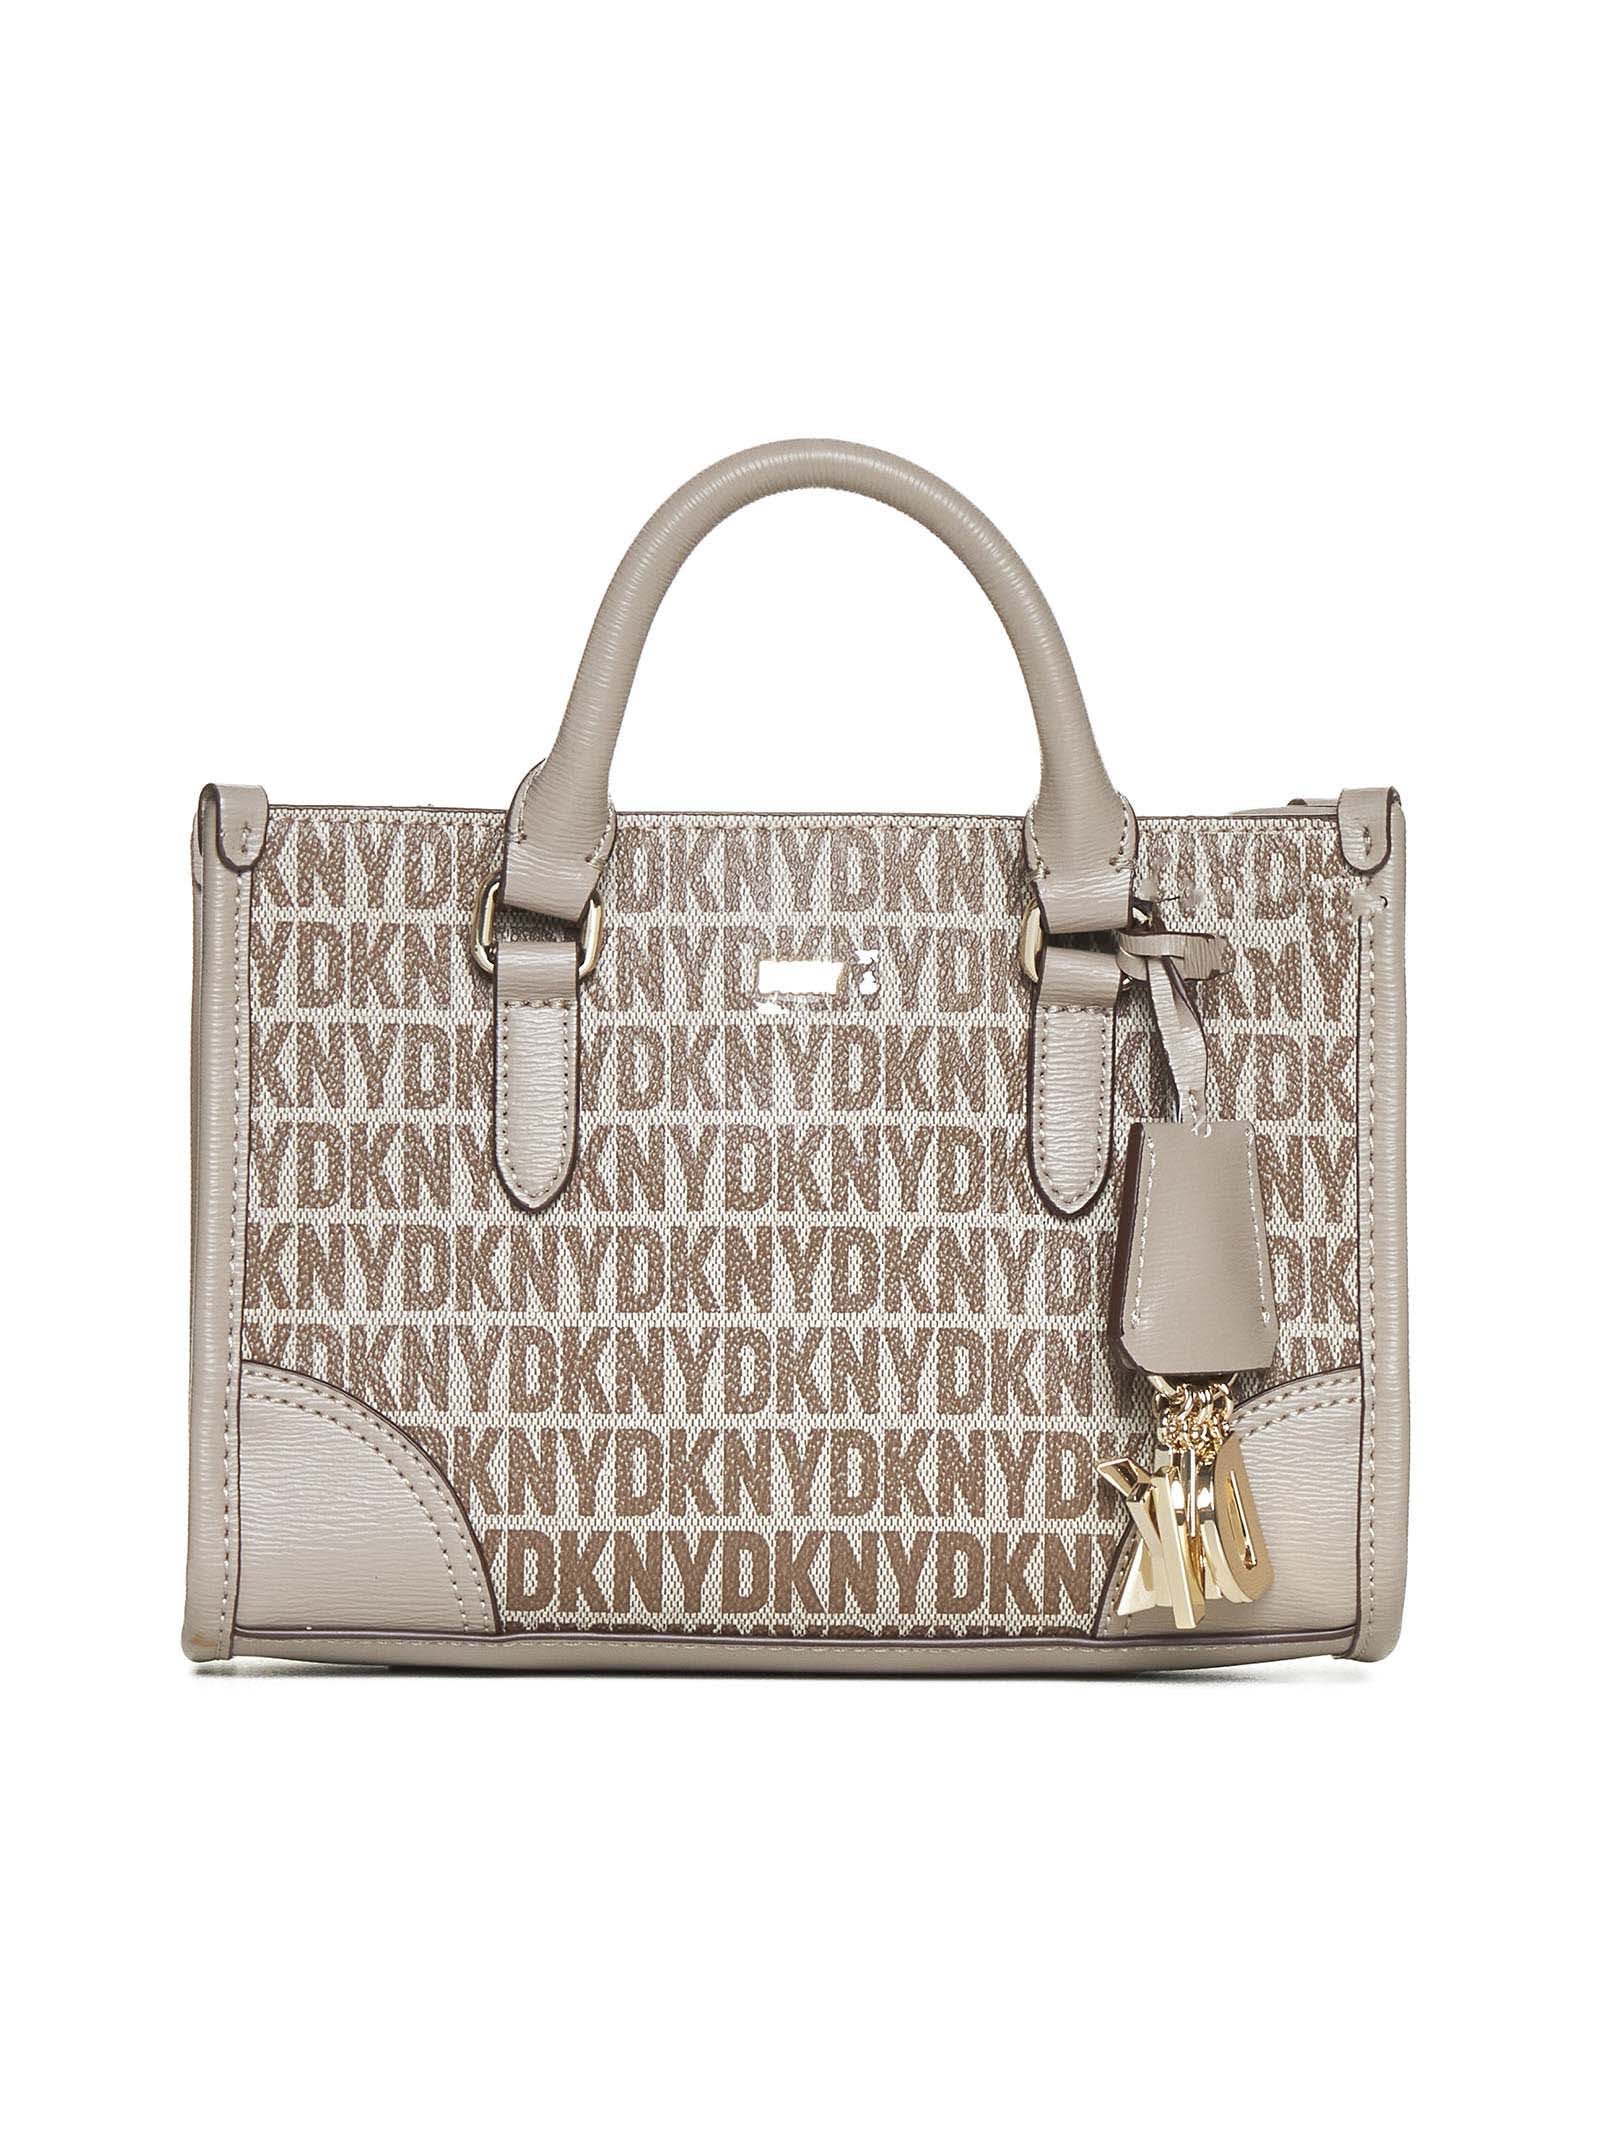 Shop Dkny Tote In Chino/toffee